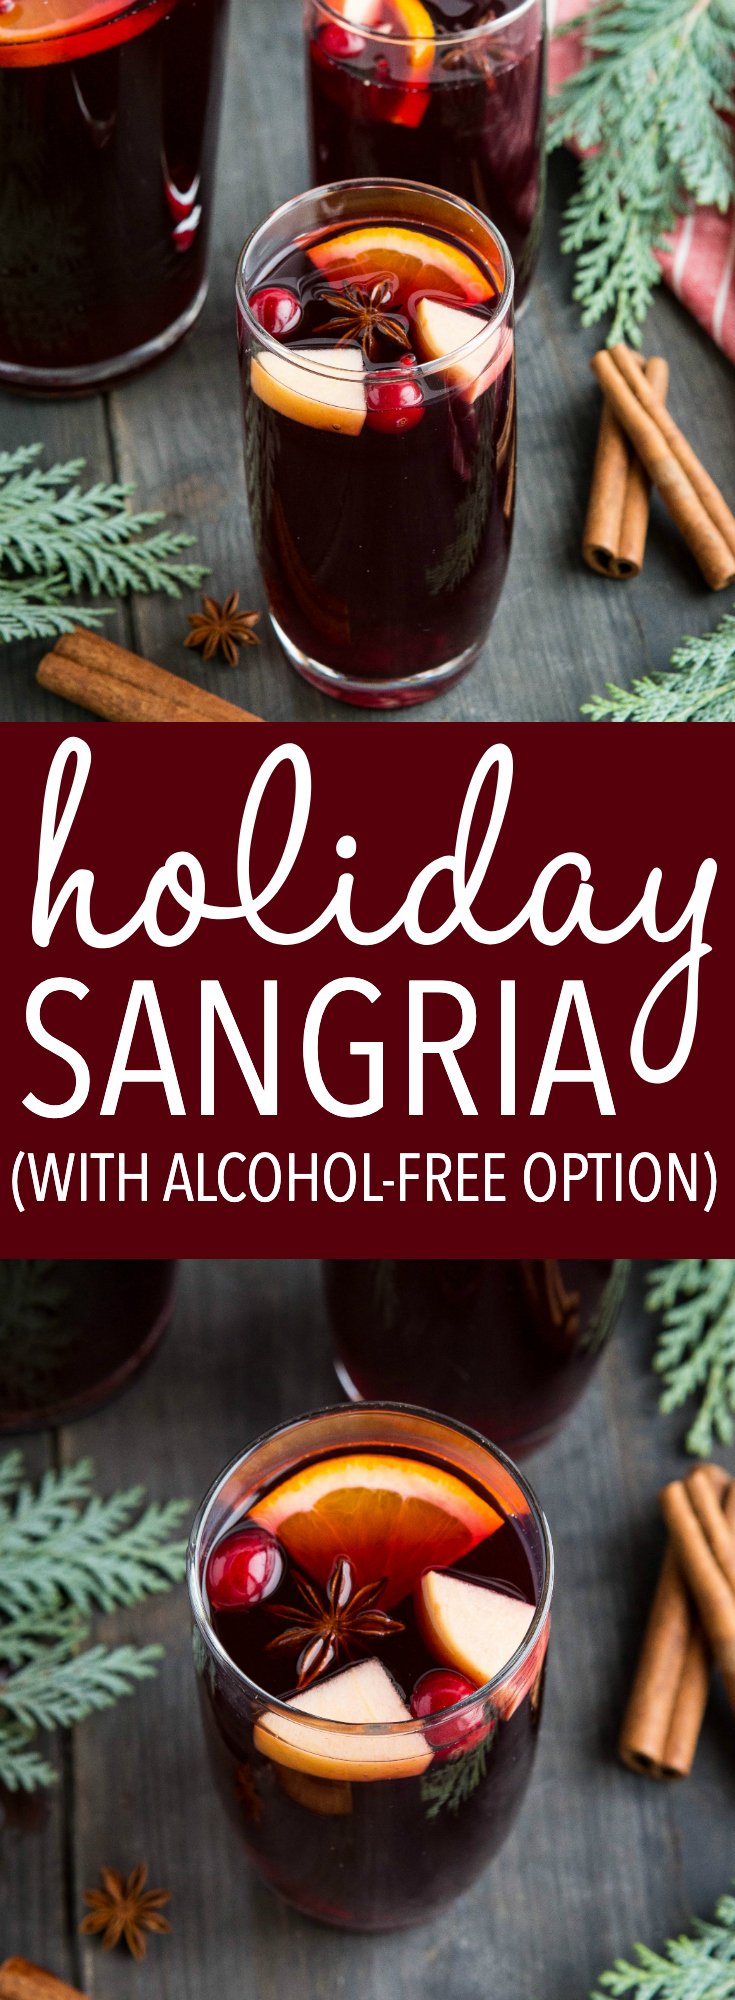 Apple Cranberry Sangria is the perfect holiday drink for Christmas or Thanksgiving. Make this recipe with wine, or as an alcohol free sangria. Recipe from thebusybaker.ca! #sangria #drinkrecipes #fruitpunch #holidaydrinks #christmas #thanksgiving #partypunch #juice #wine #newyears #festive via @busybakerblog